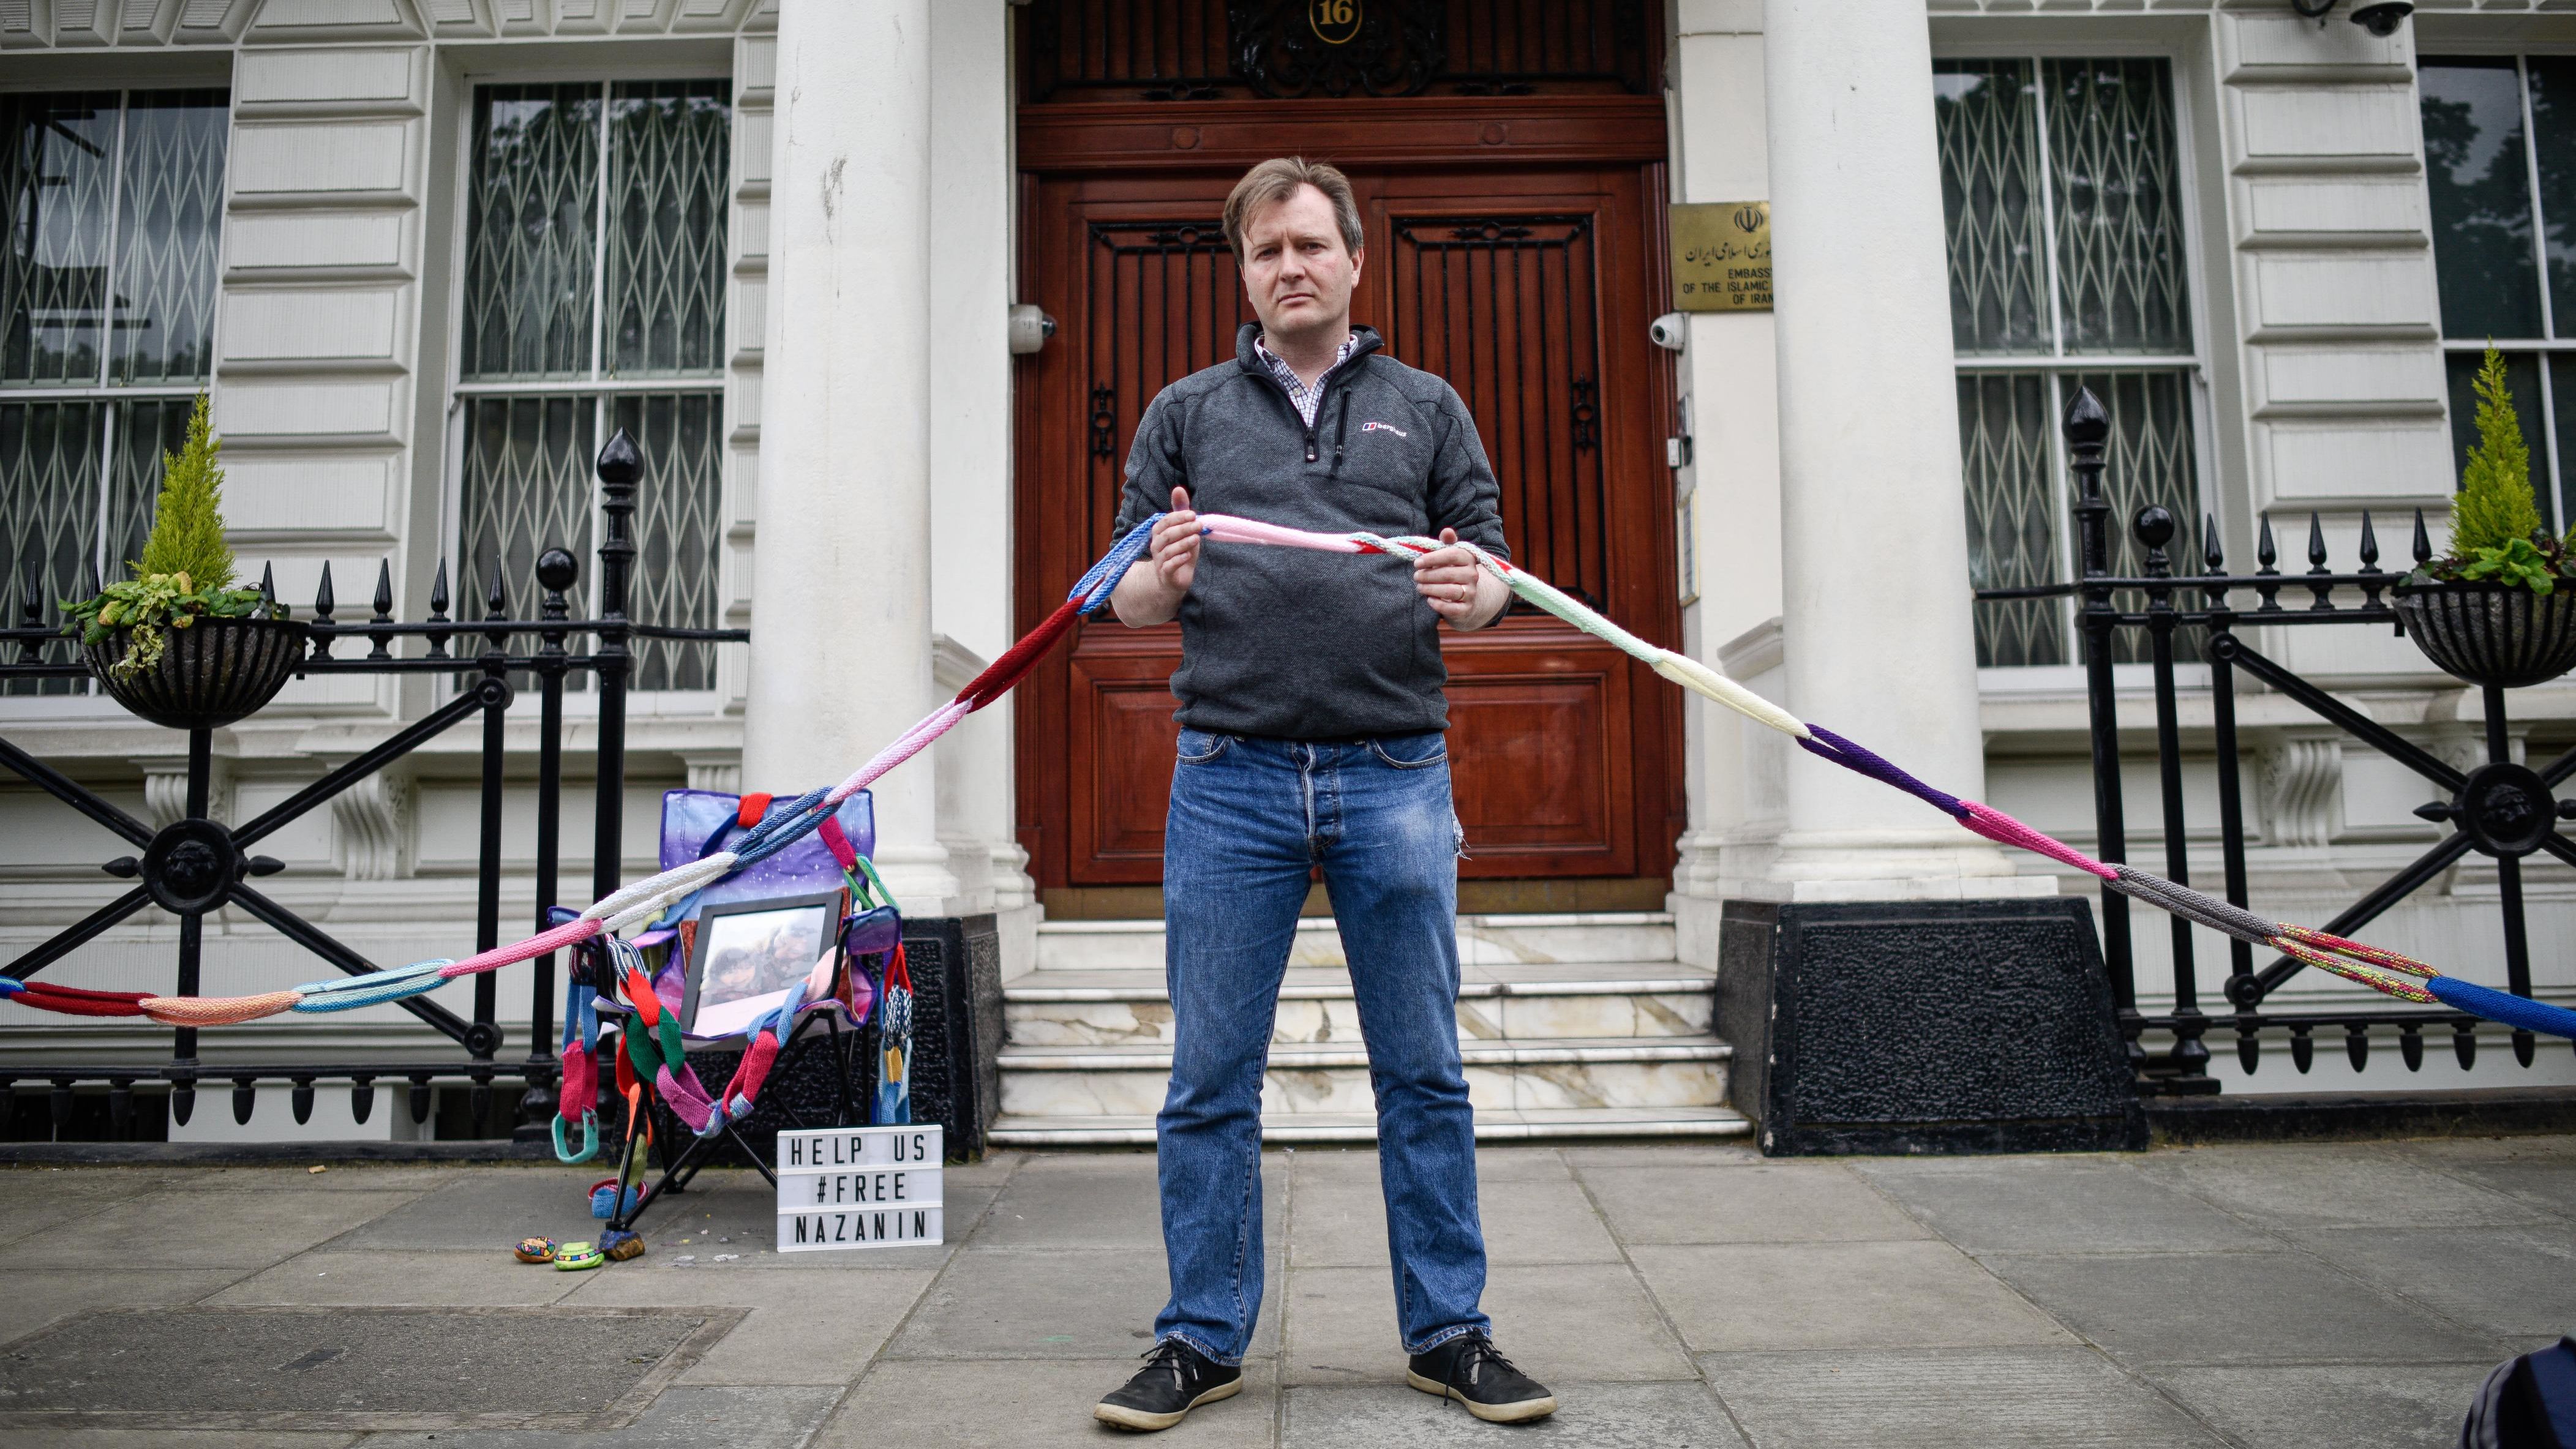 Richard Ratcliffe has begun a hunger strike outside the Iranian embassy in London in solidarity with his wife, Nazanin Zaghari-Ratcliffe.